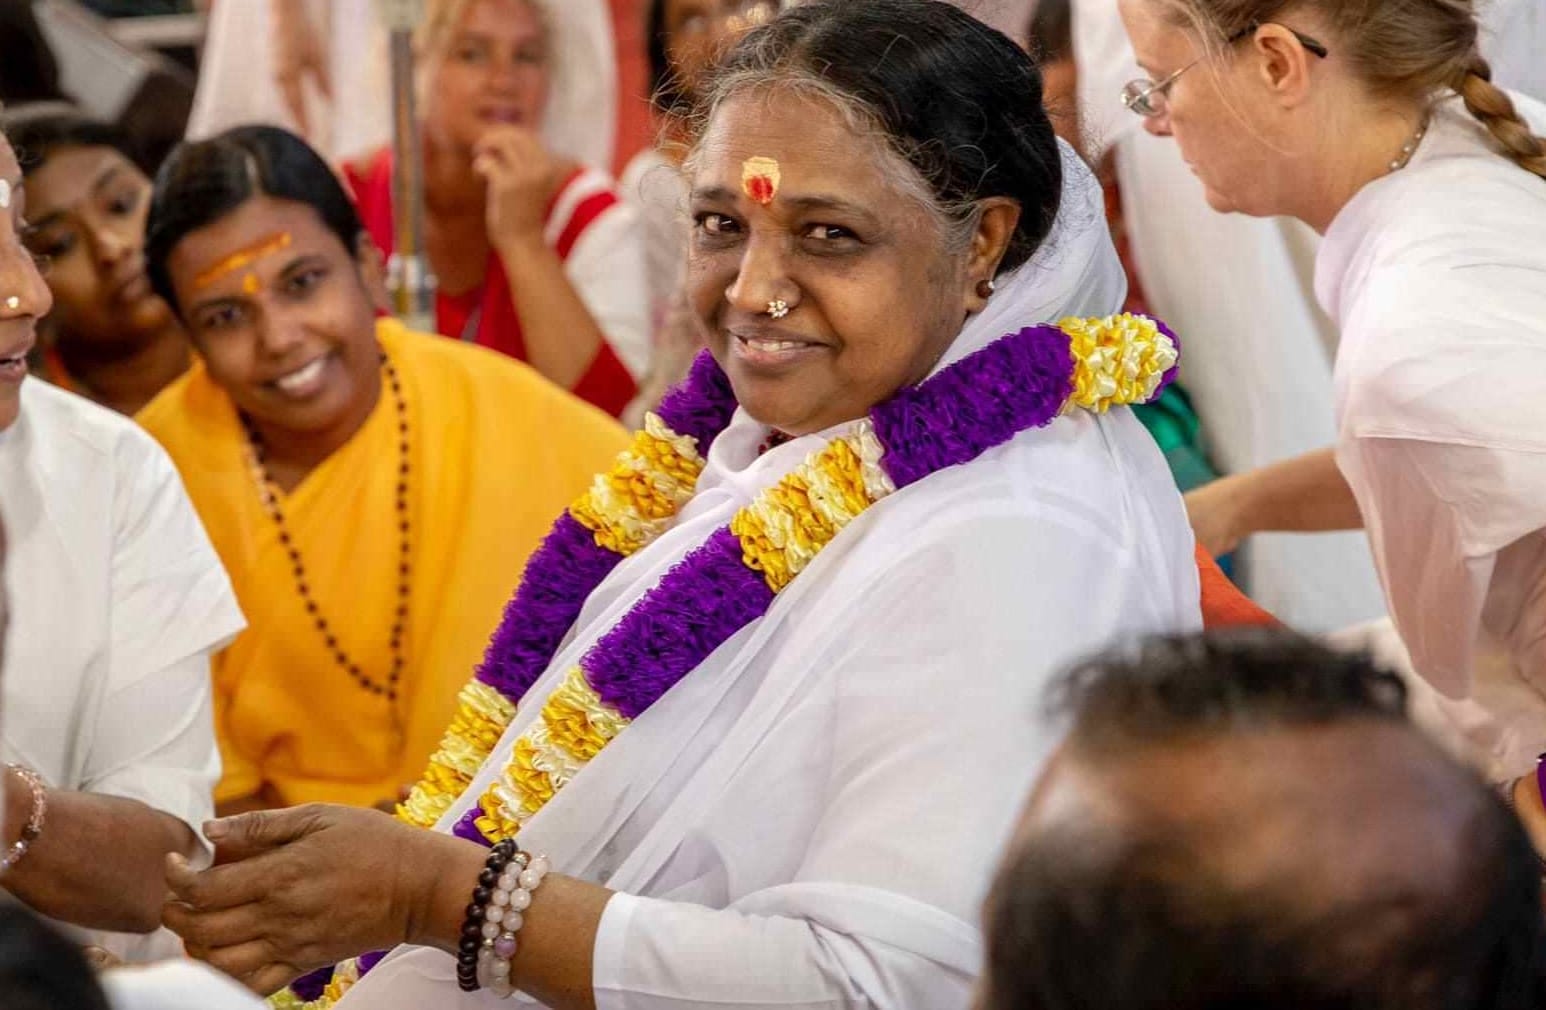 Picturing of Amma smiling purple and gold garland